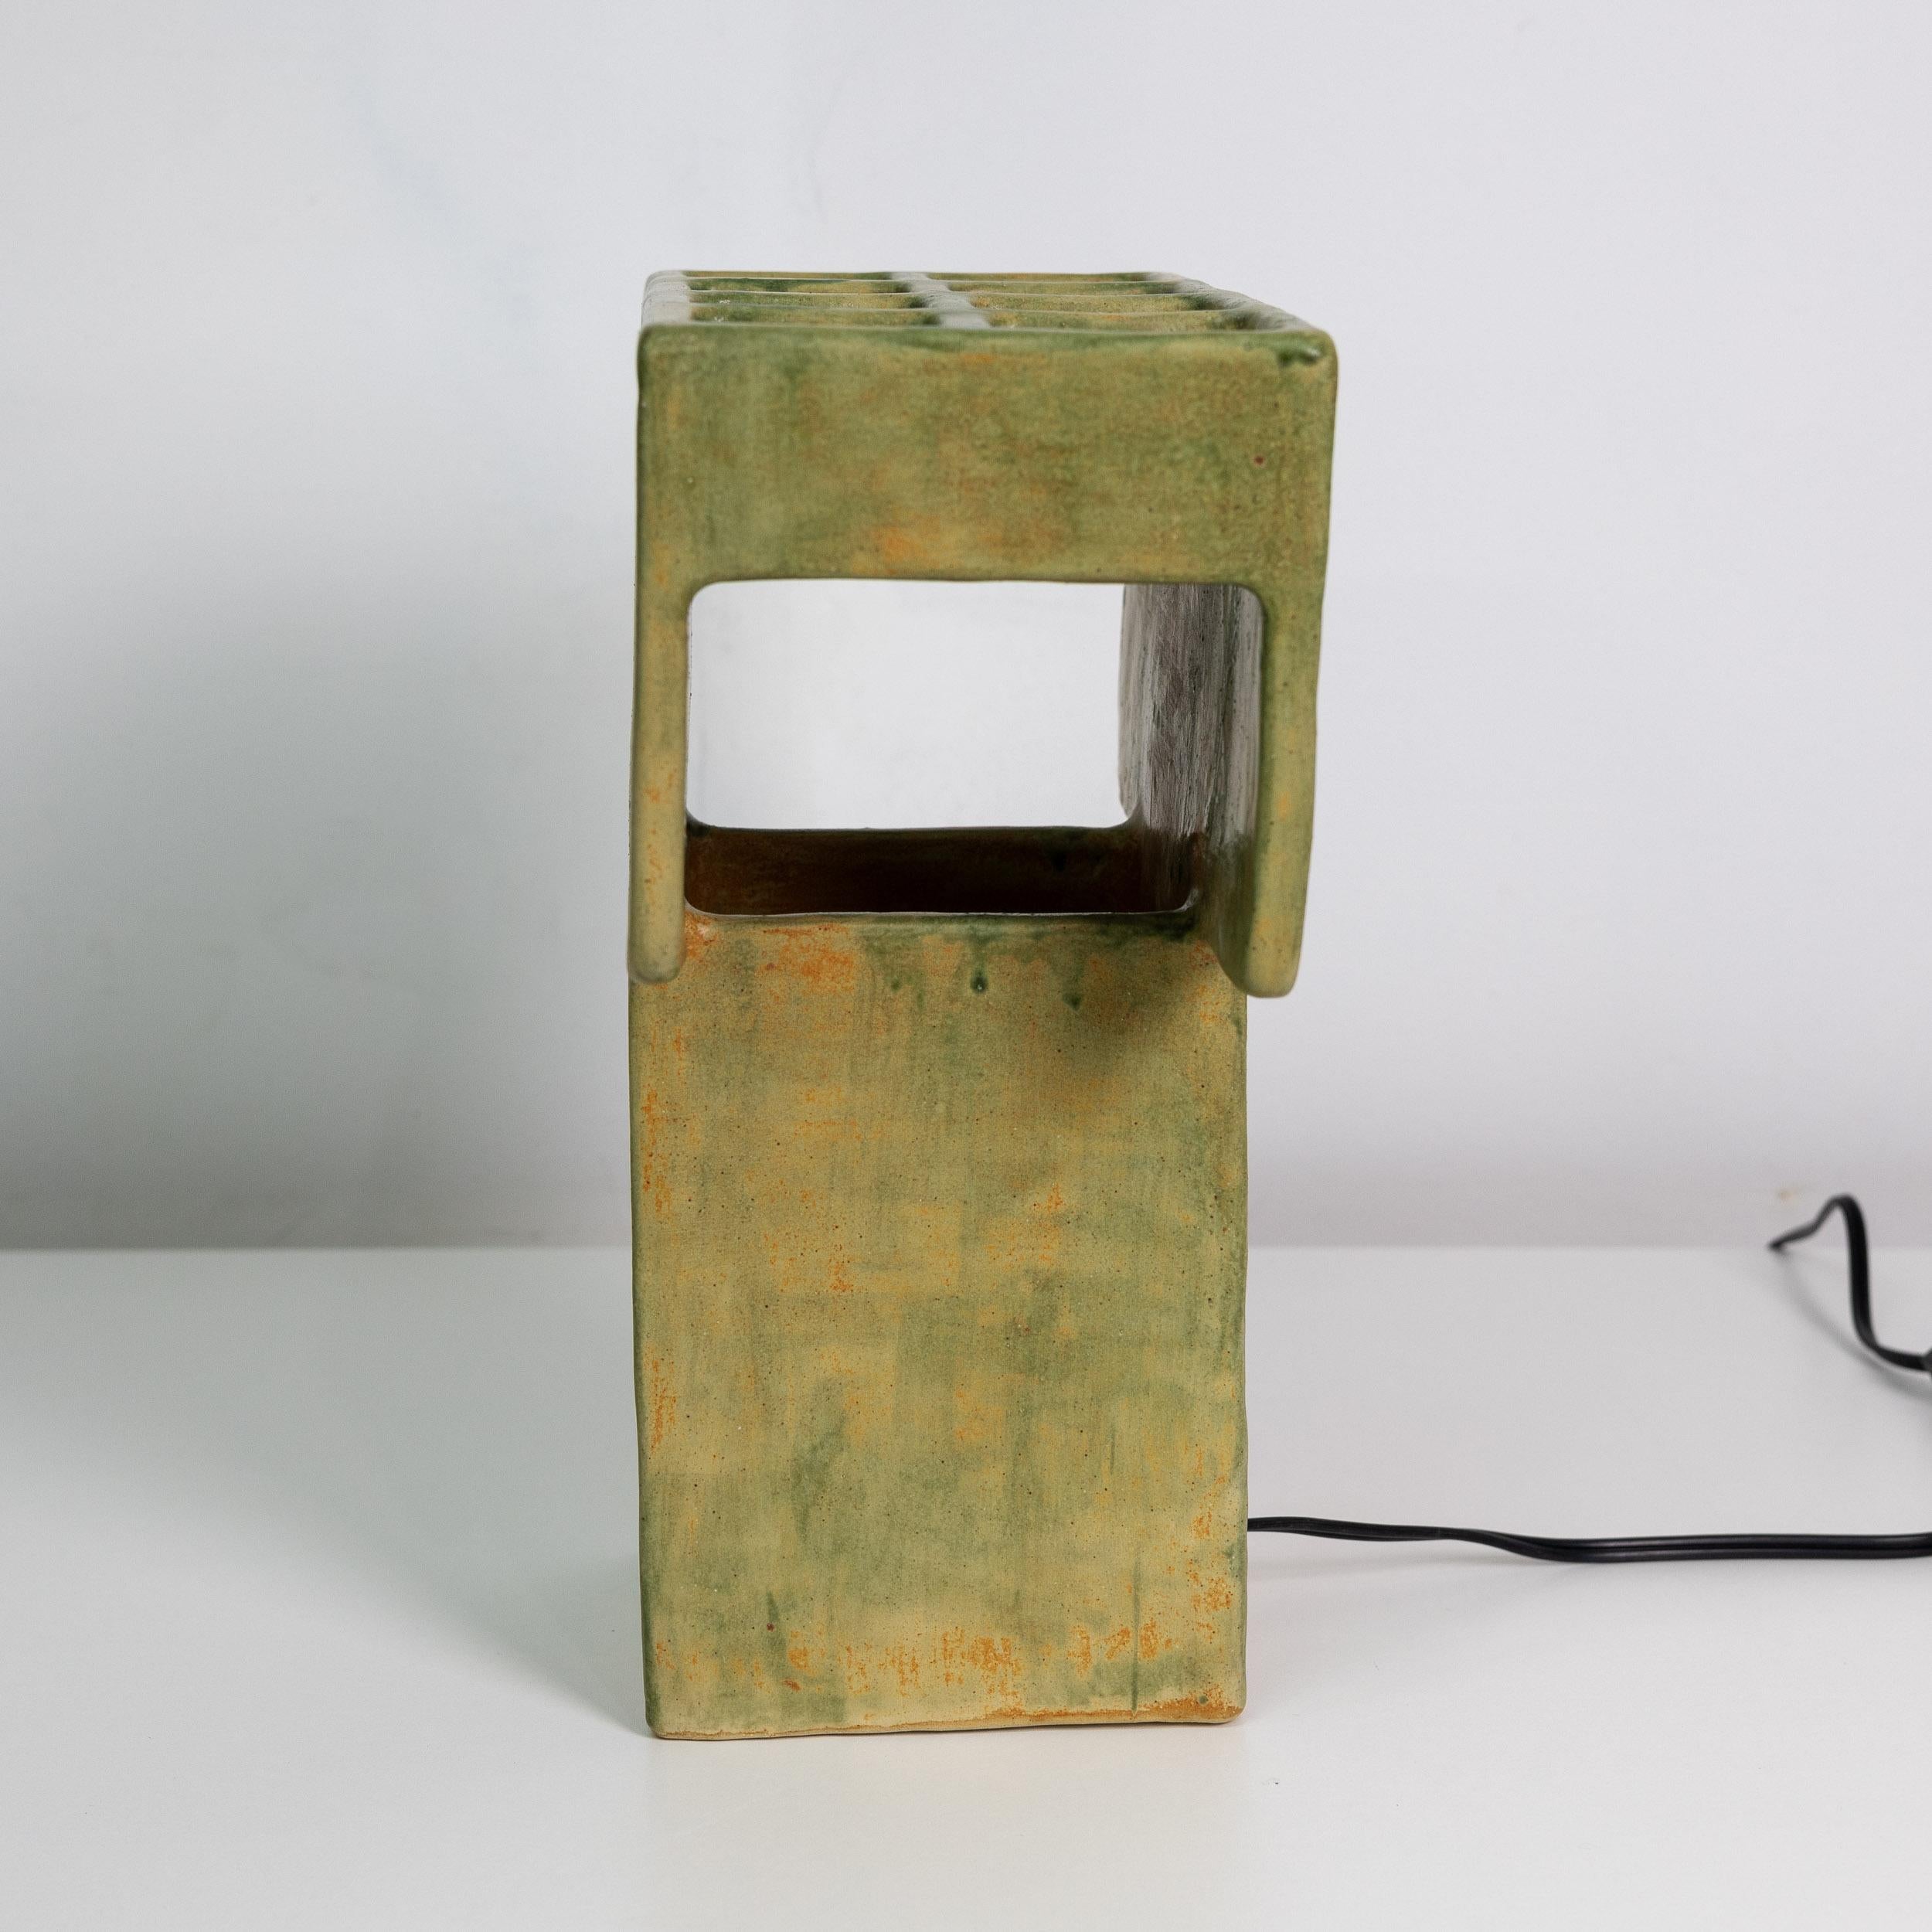 Mr. T Ceramic Table Lamp, Geometric, Brutalist, Square Table Light, Clay, Glazed For Sale 1